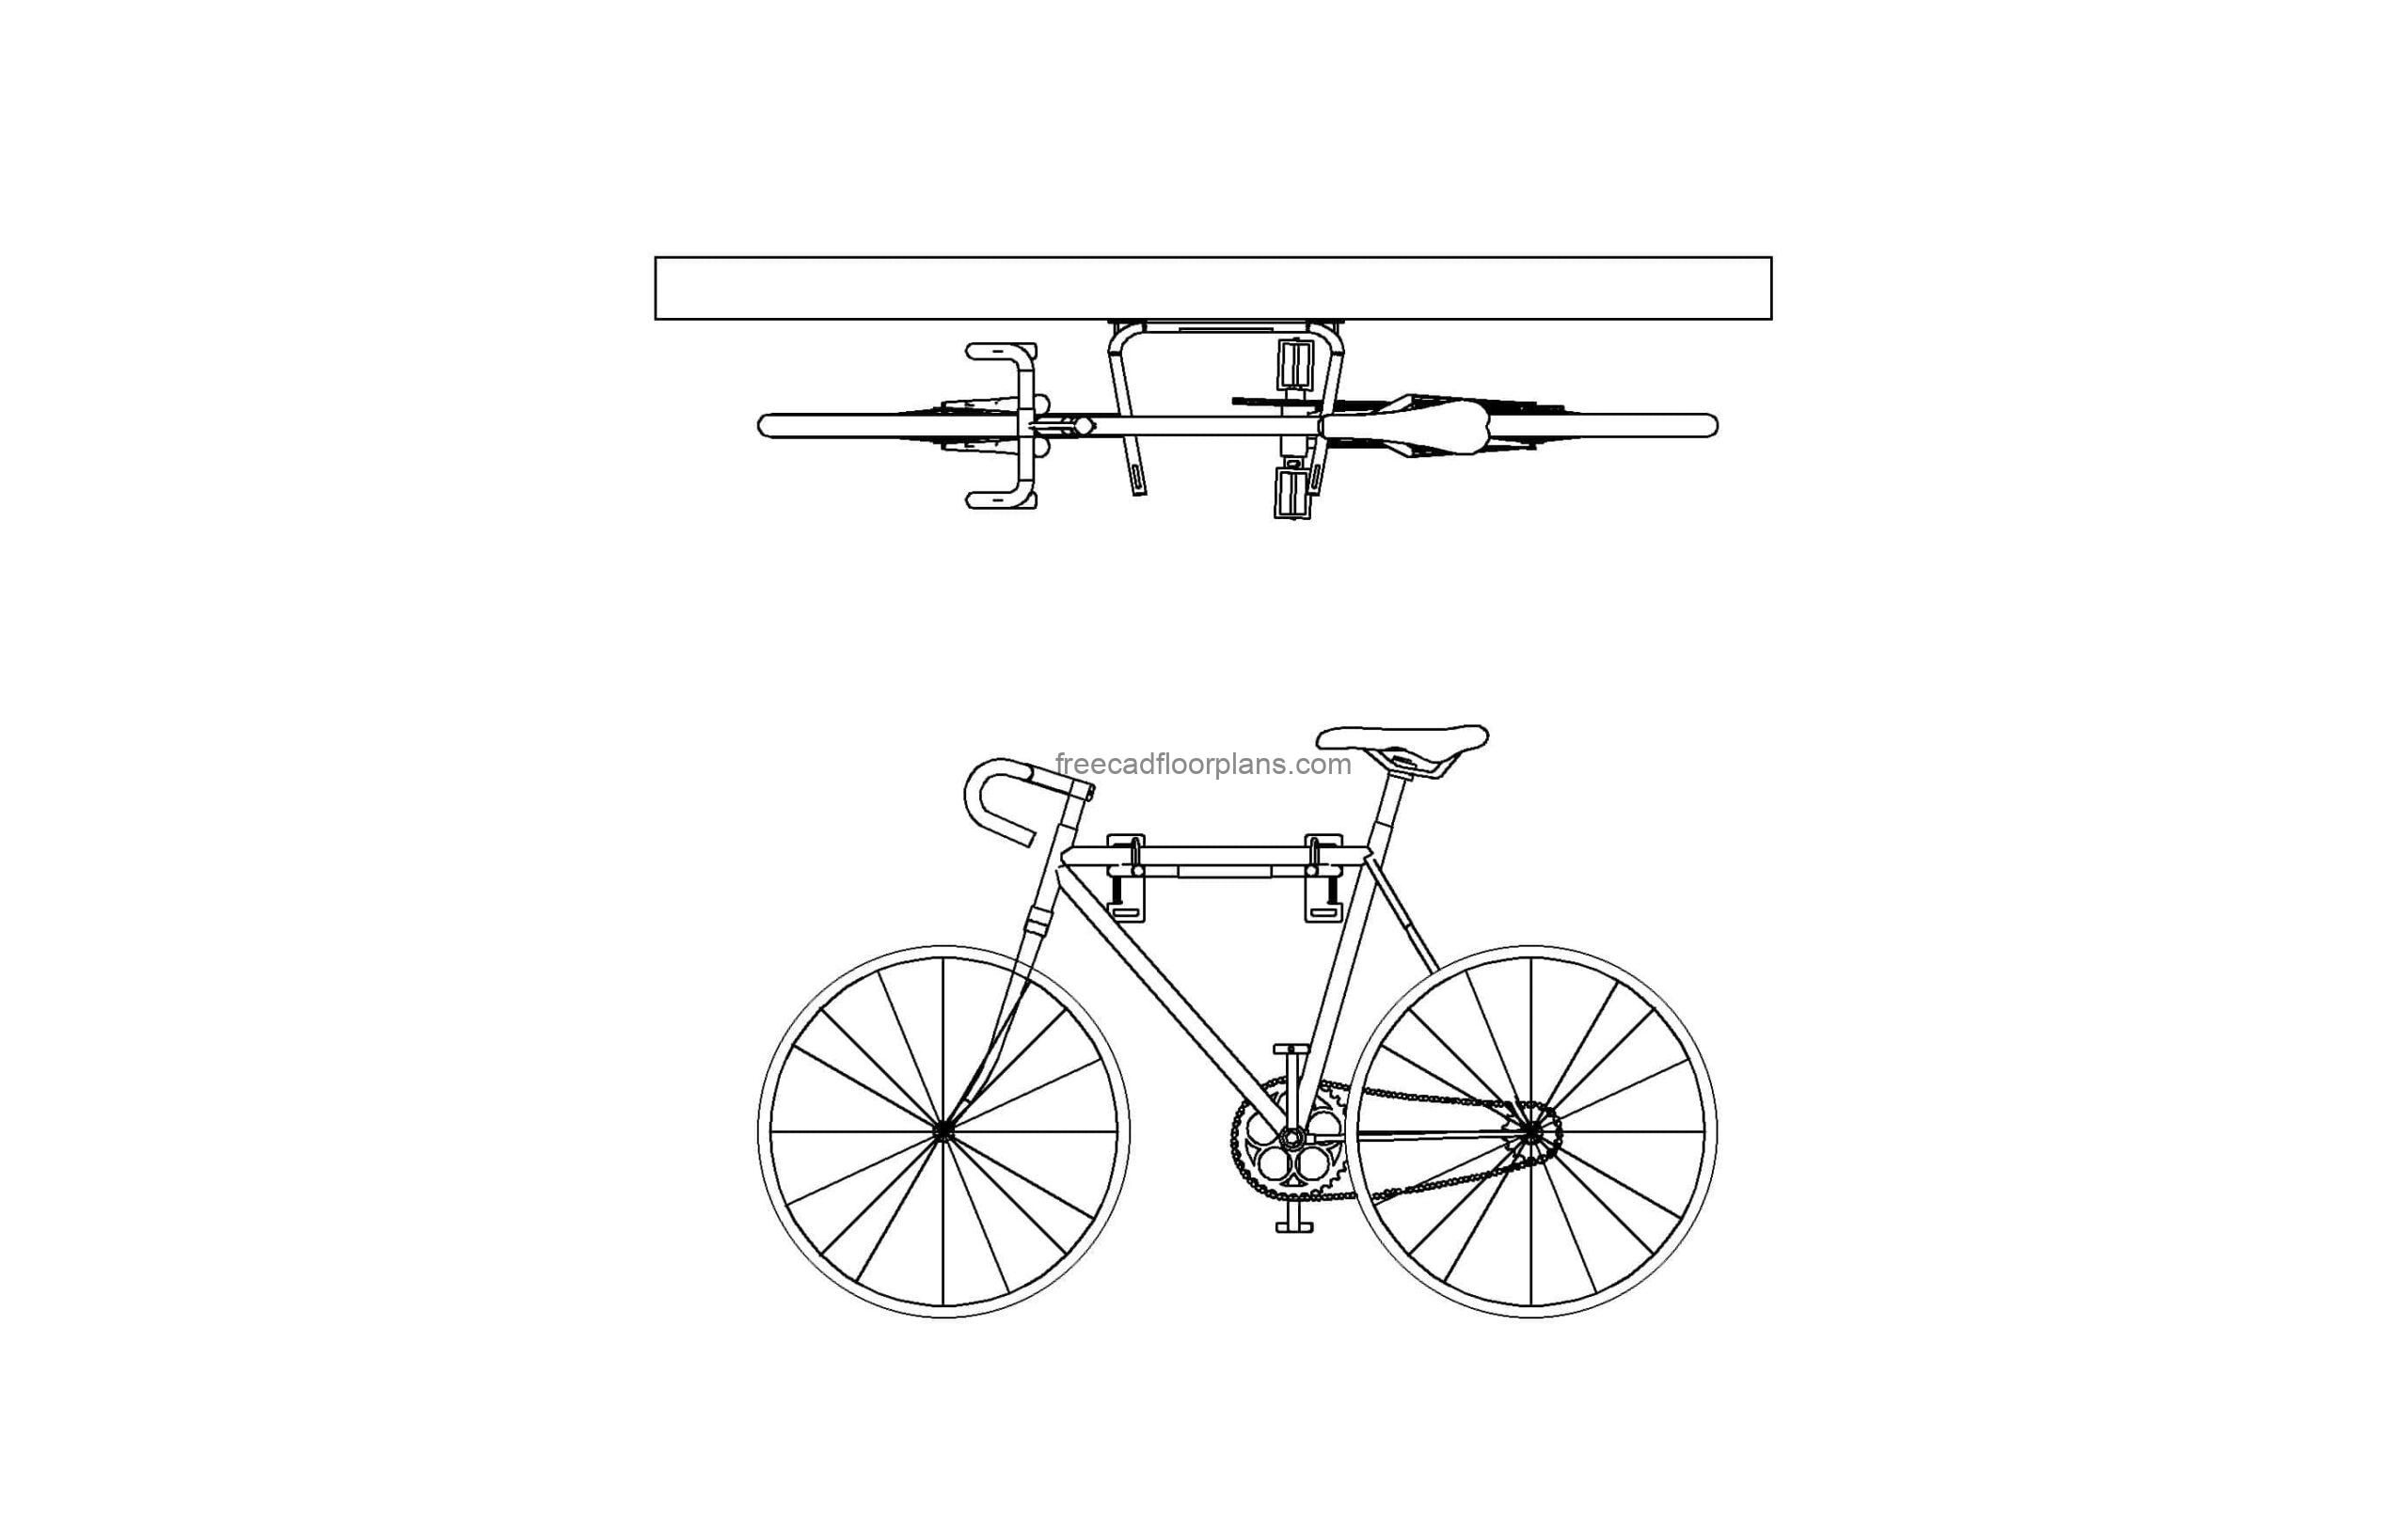 autocad drawing of a wall mounted bike rack, plan and front elevation 2d views, dwg file for free download